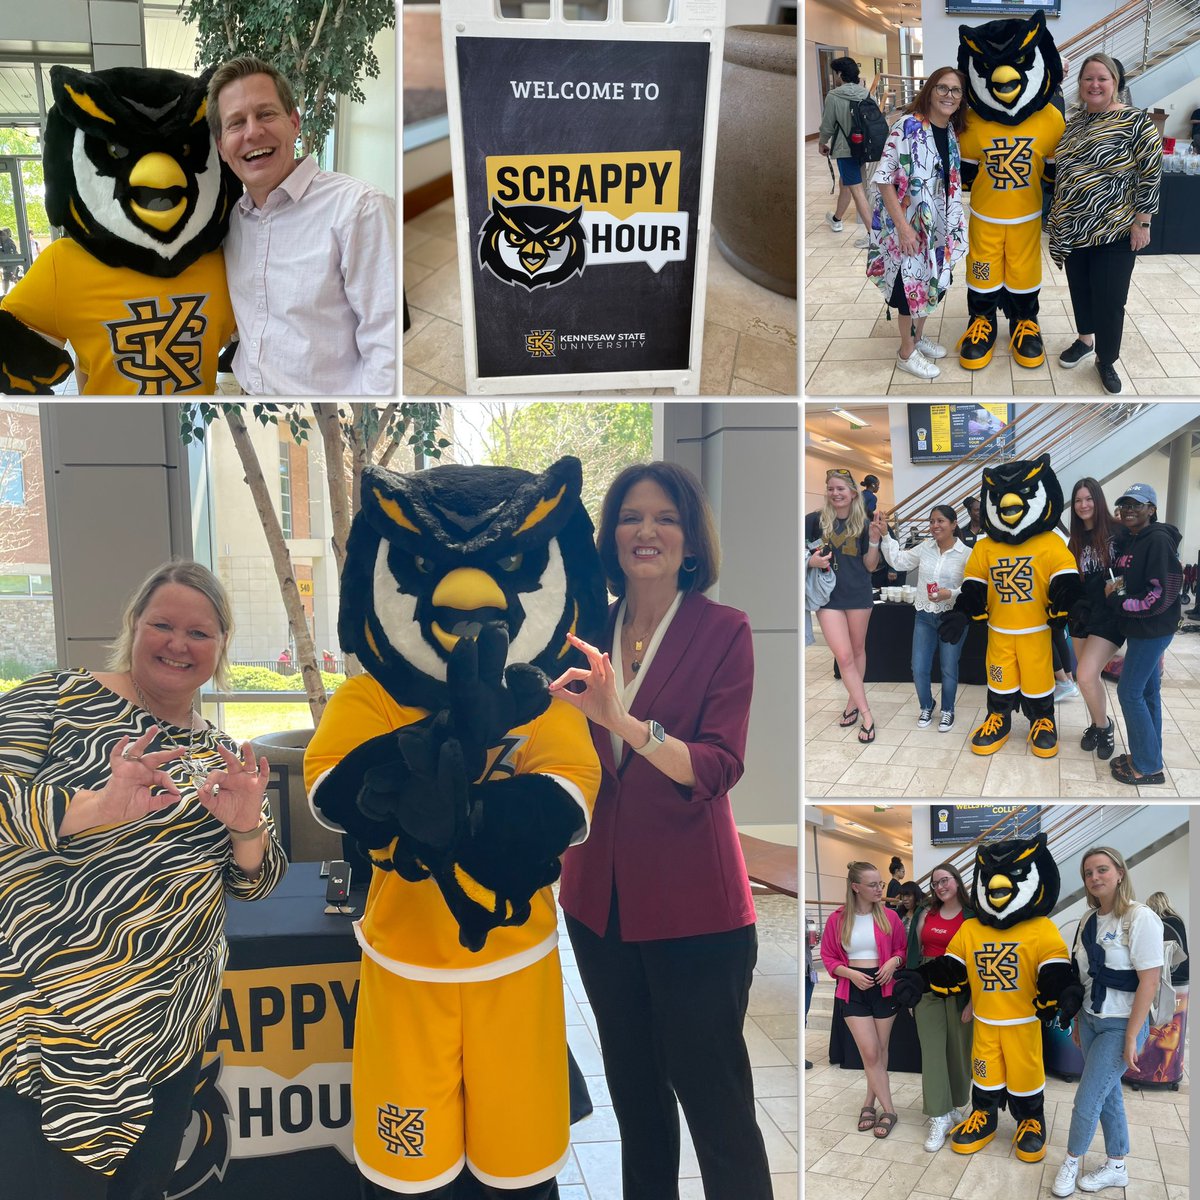 We had so much fun during Scrappy Hour! We treated students to ice cream floats &  just took a bit of time to build community. And, so glad President Kat Schwaig joined us too.  
#Community #thisisWellstarCollege #ScrappyHour #HootyHoo #studentsuccess @wellstarcollege #KSU